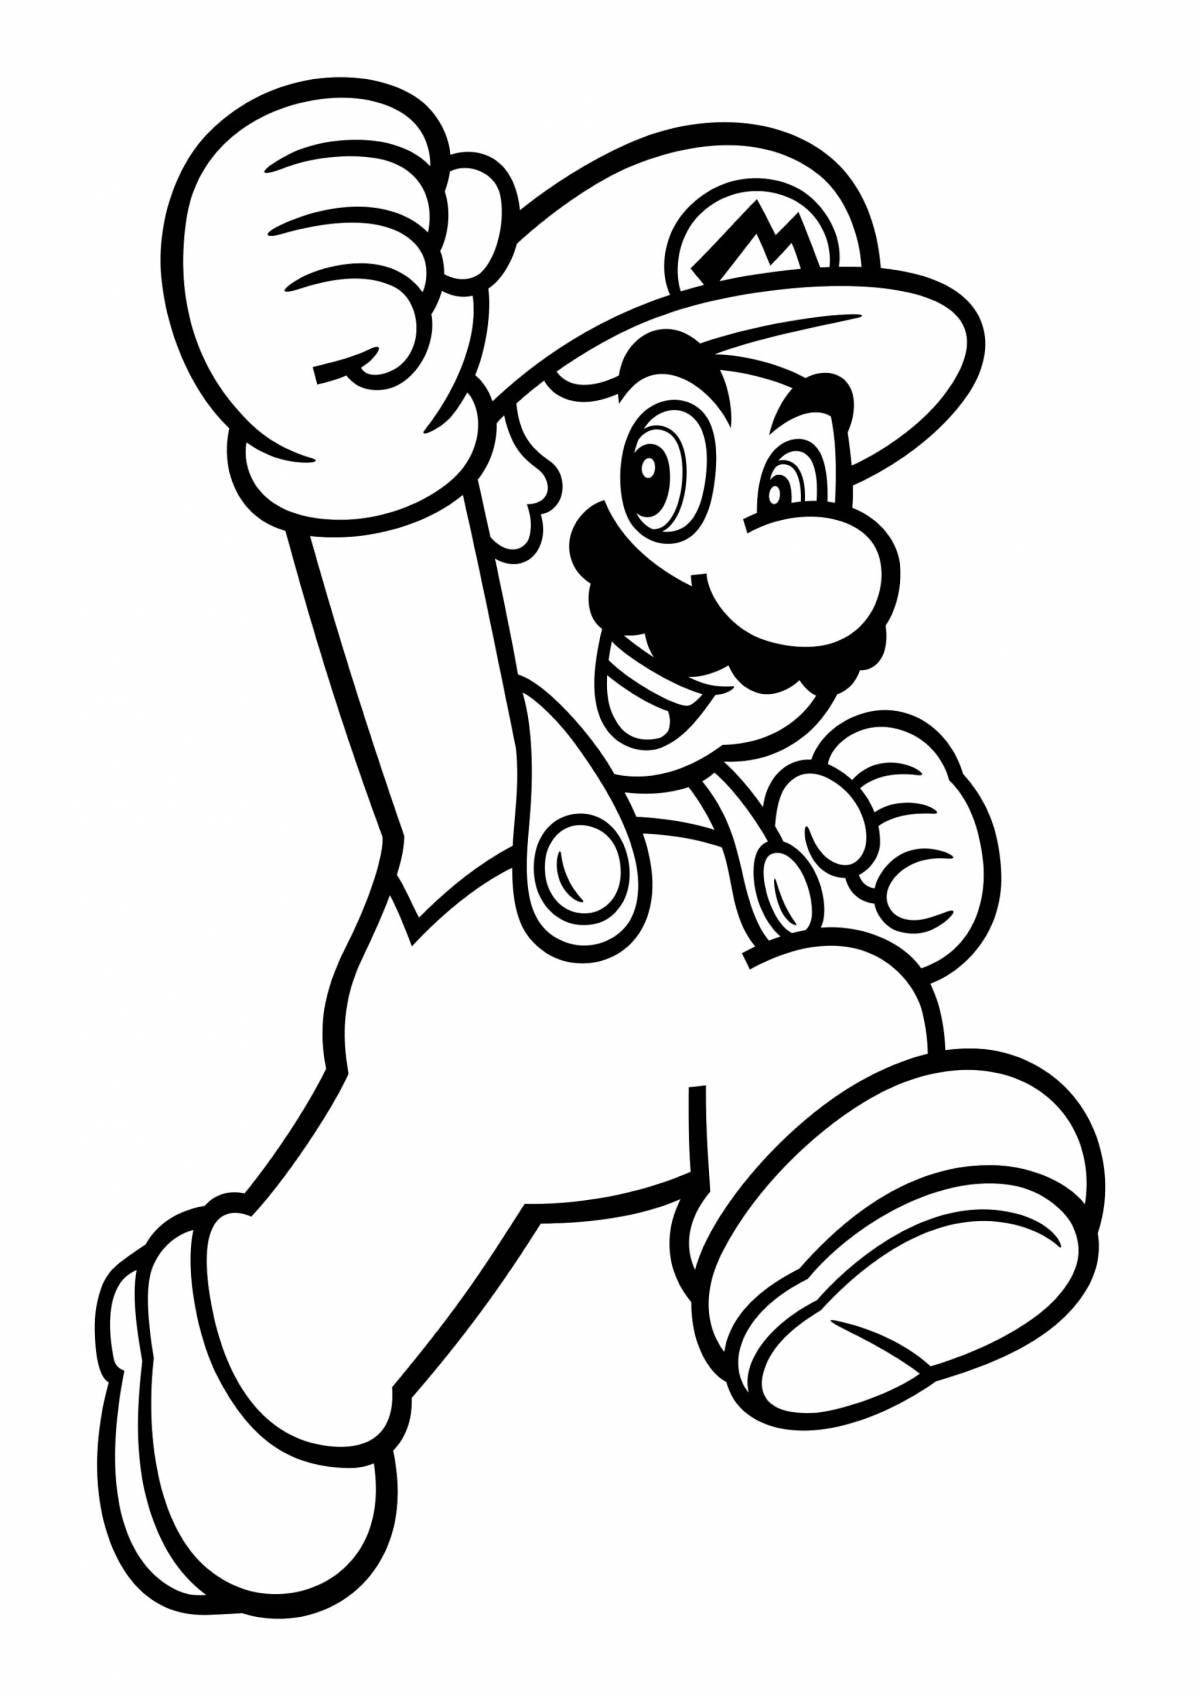 Fancy mario coloring for kids